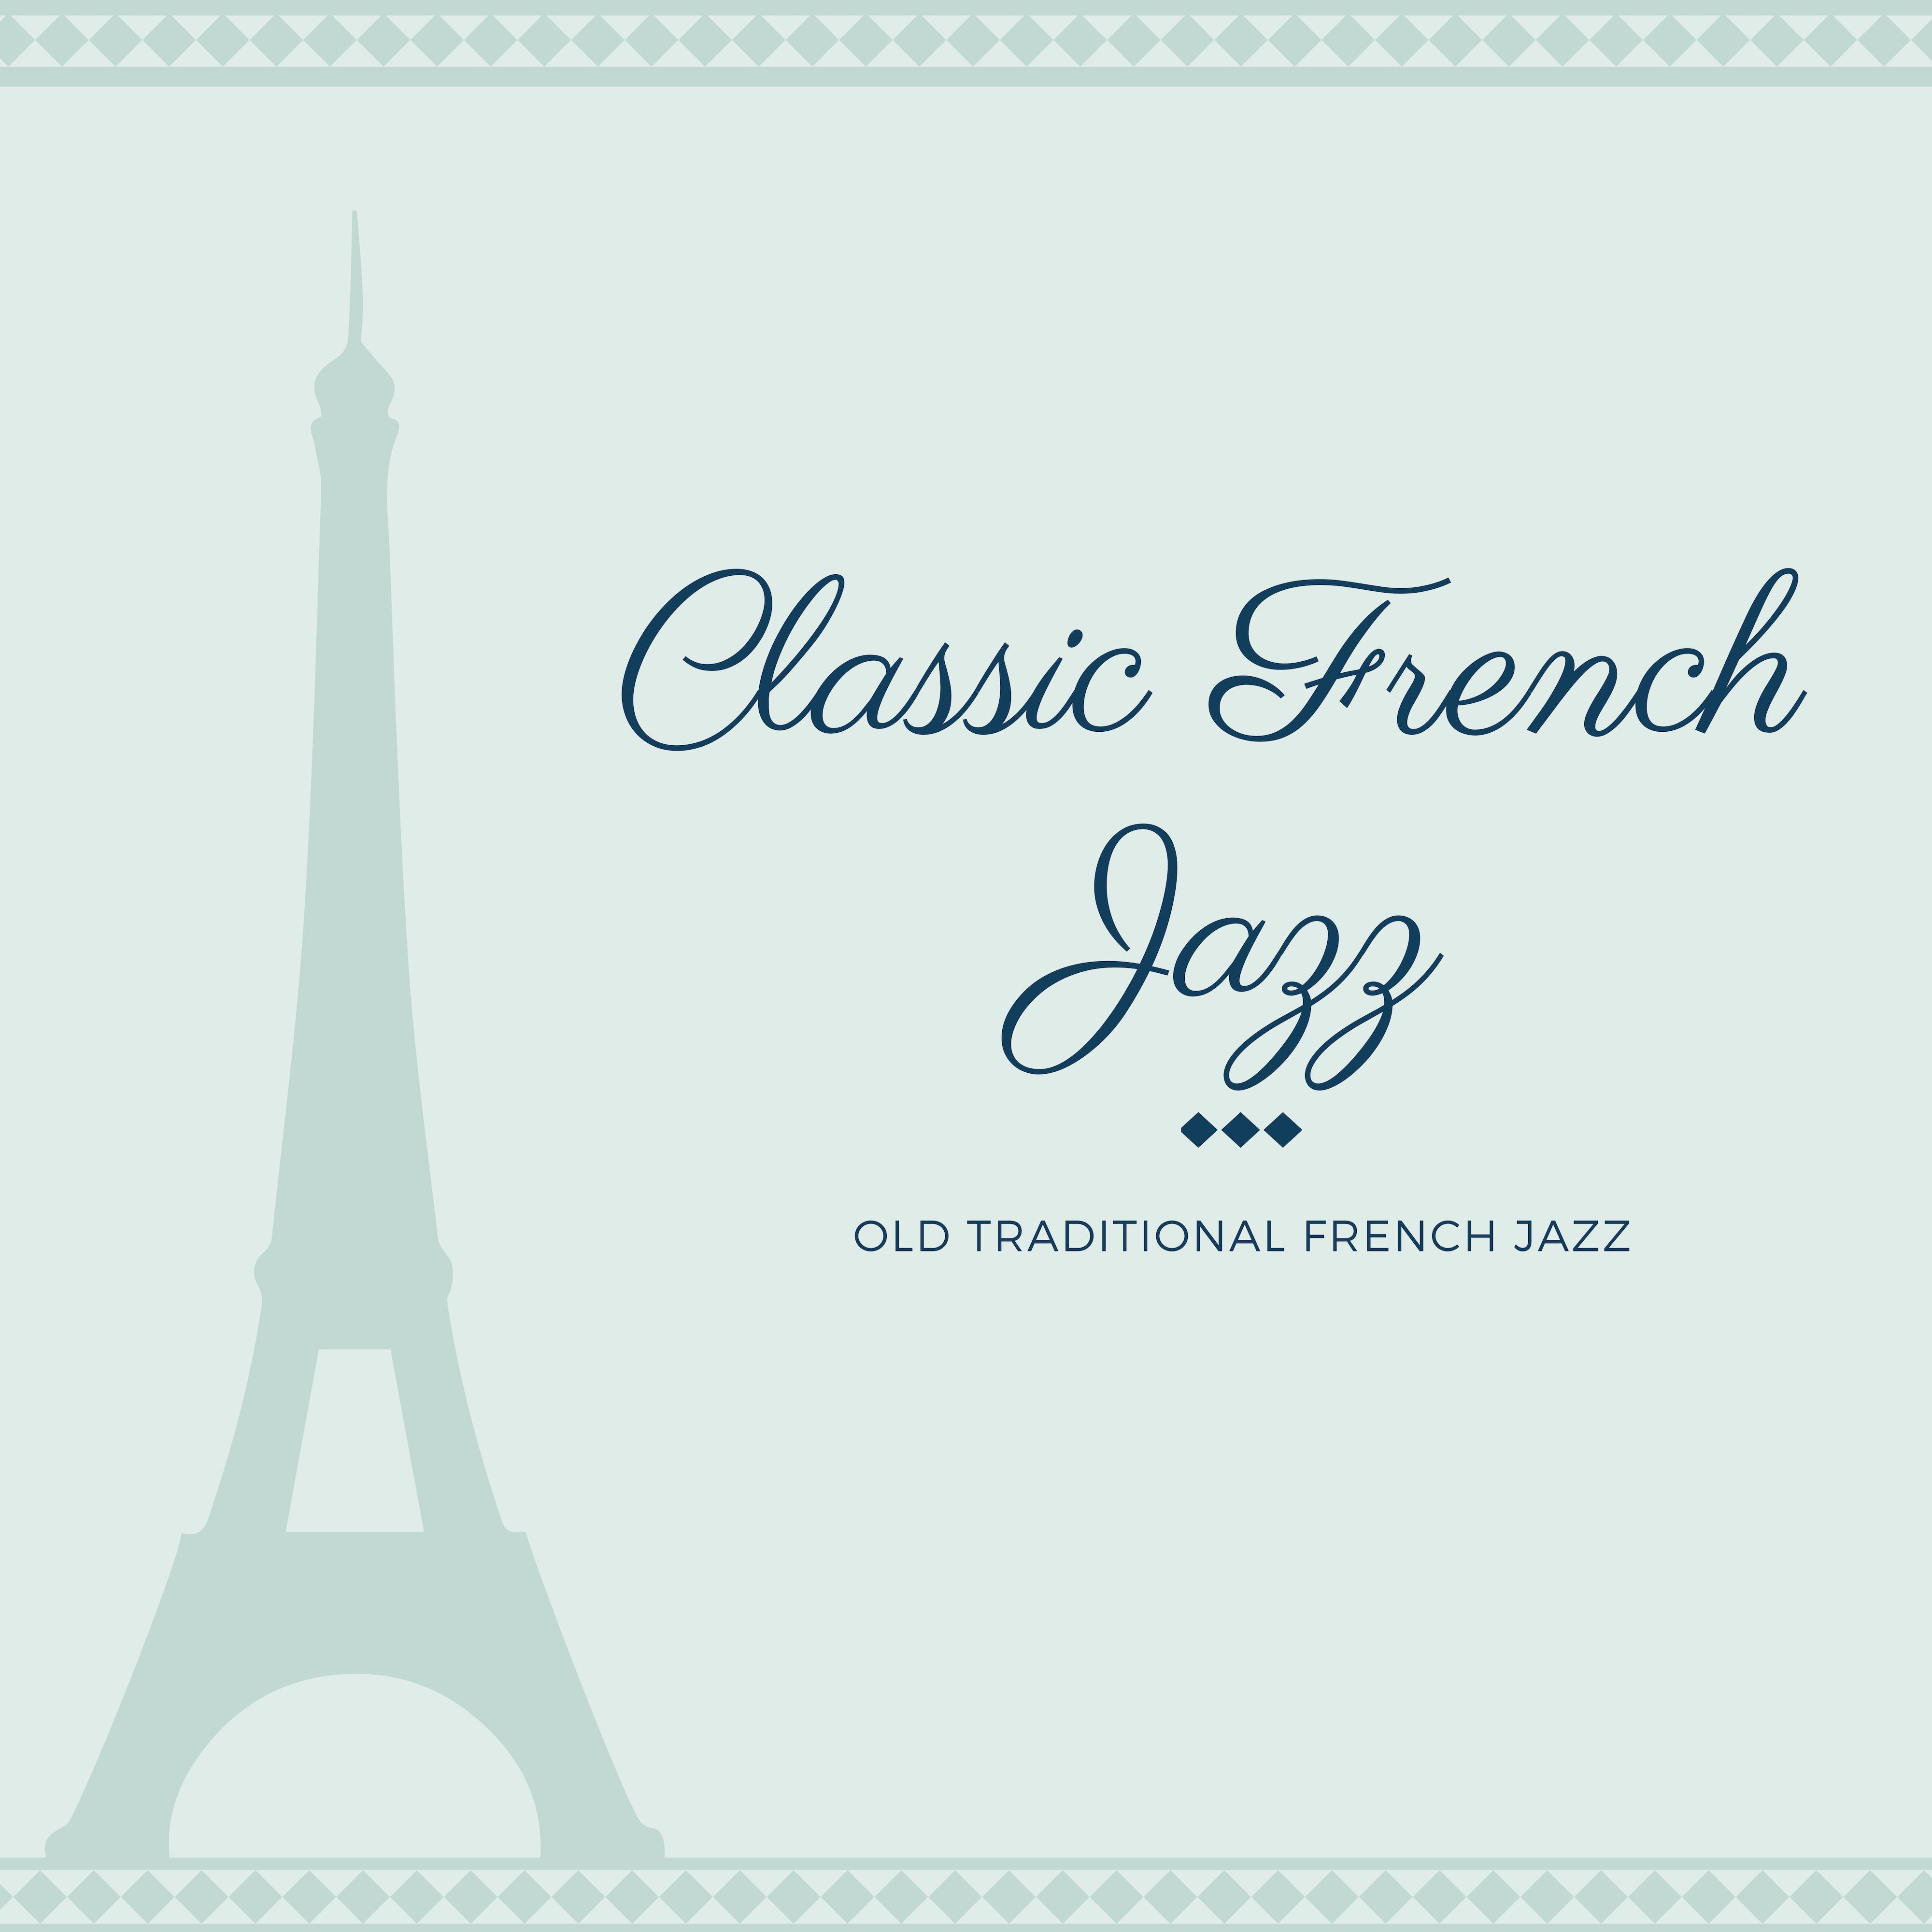 Old Traditional French Jazz